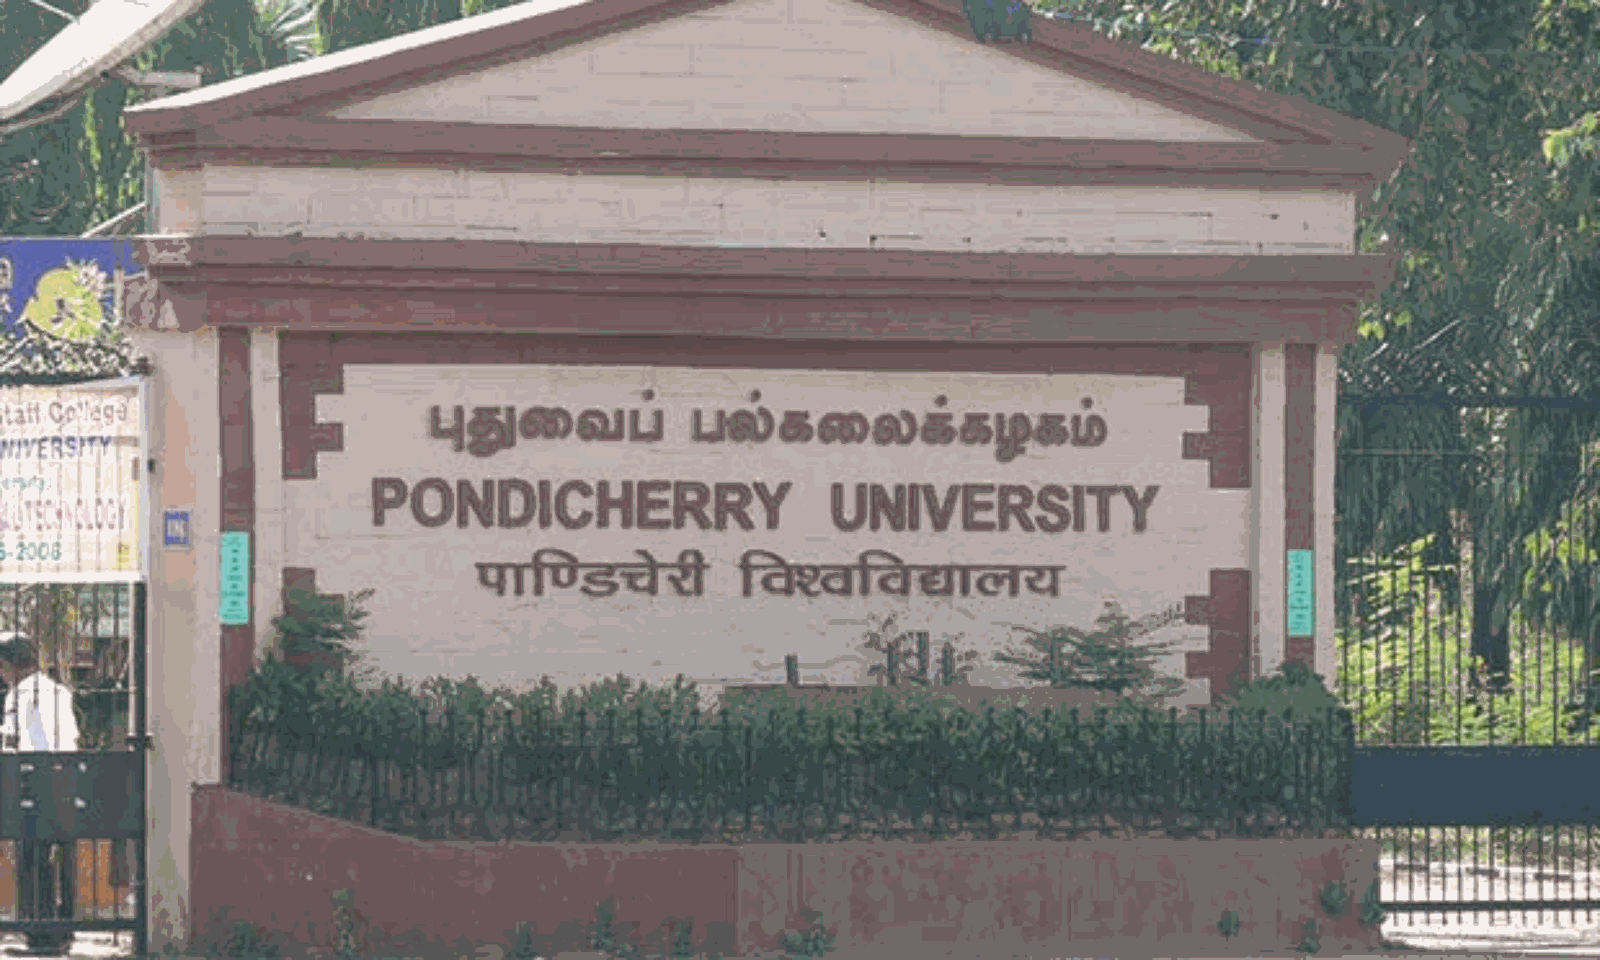 Pondicherry Varsity asks students to donate caution deposit due to lack of UGC funds